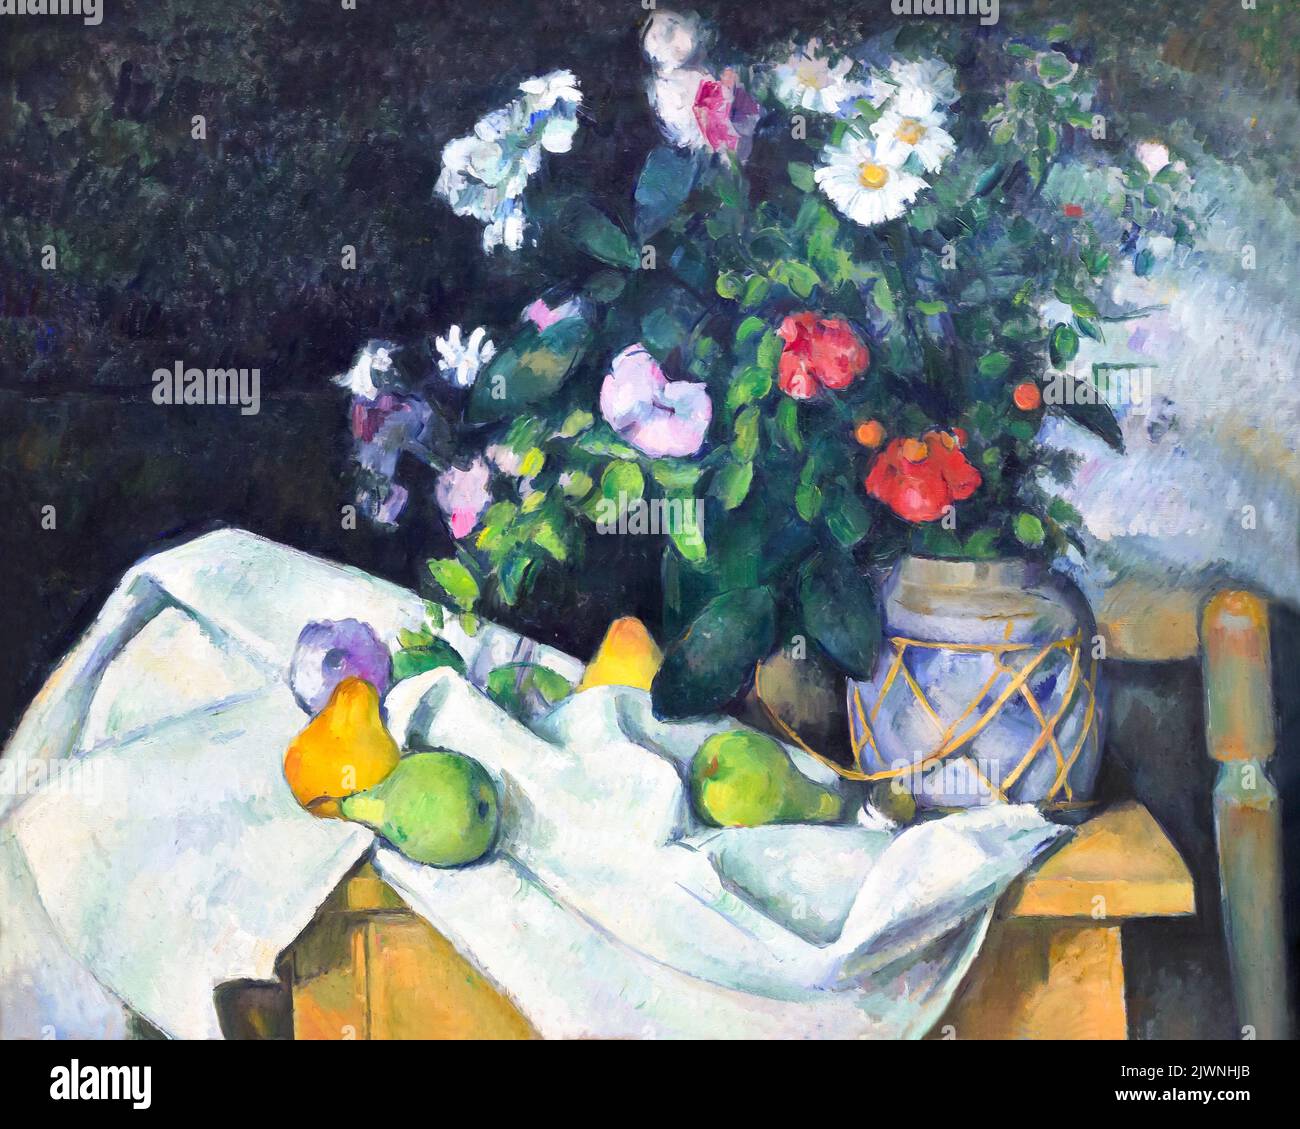 Still Life with Flowers and Fruit, Paul Cezanne, circa 1890,  Alte Nationalgalerie,Berlin, Germany, Europe Stock Photo